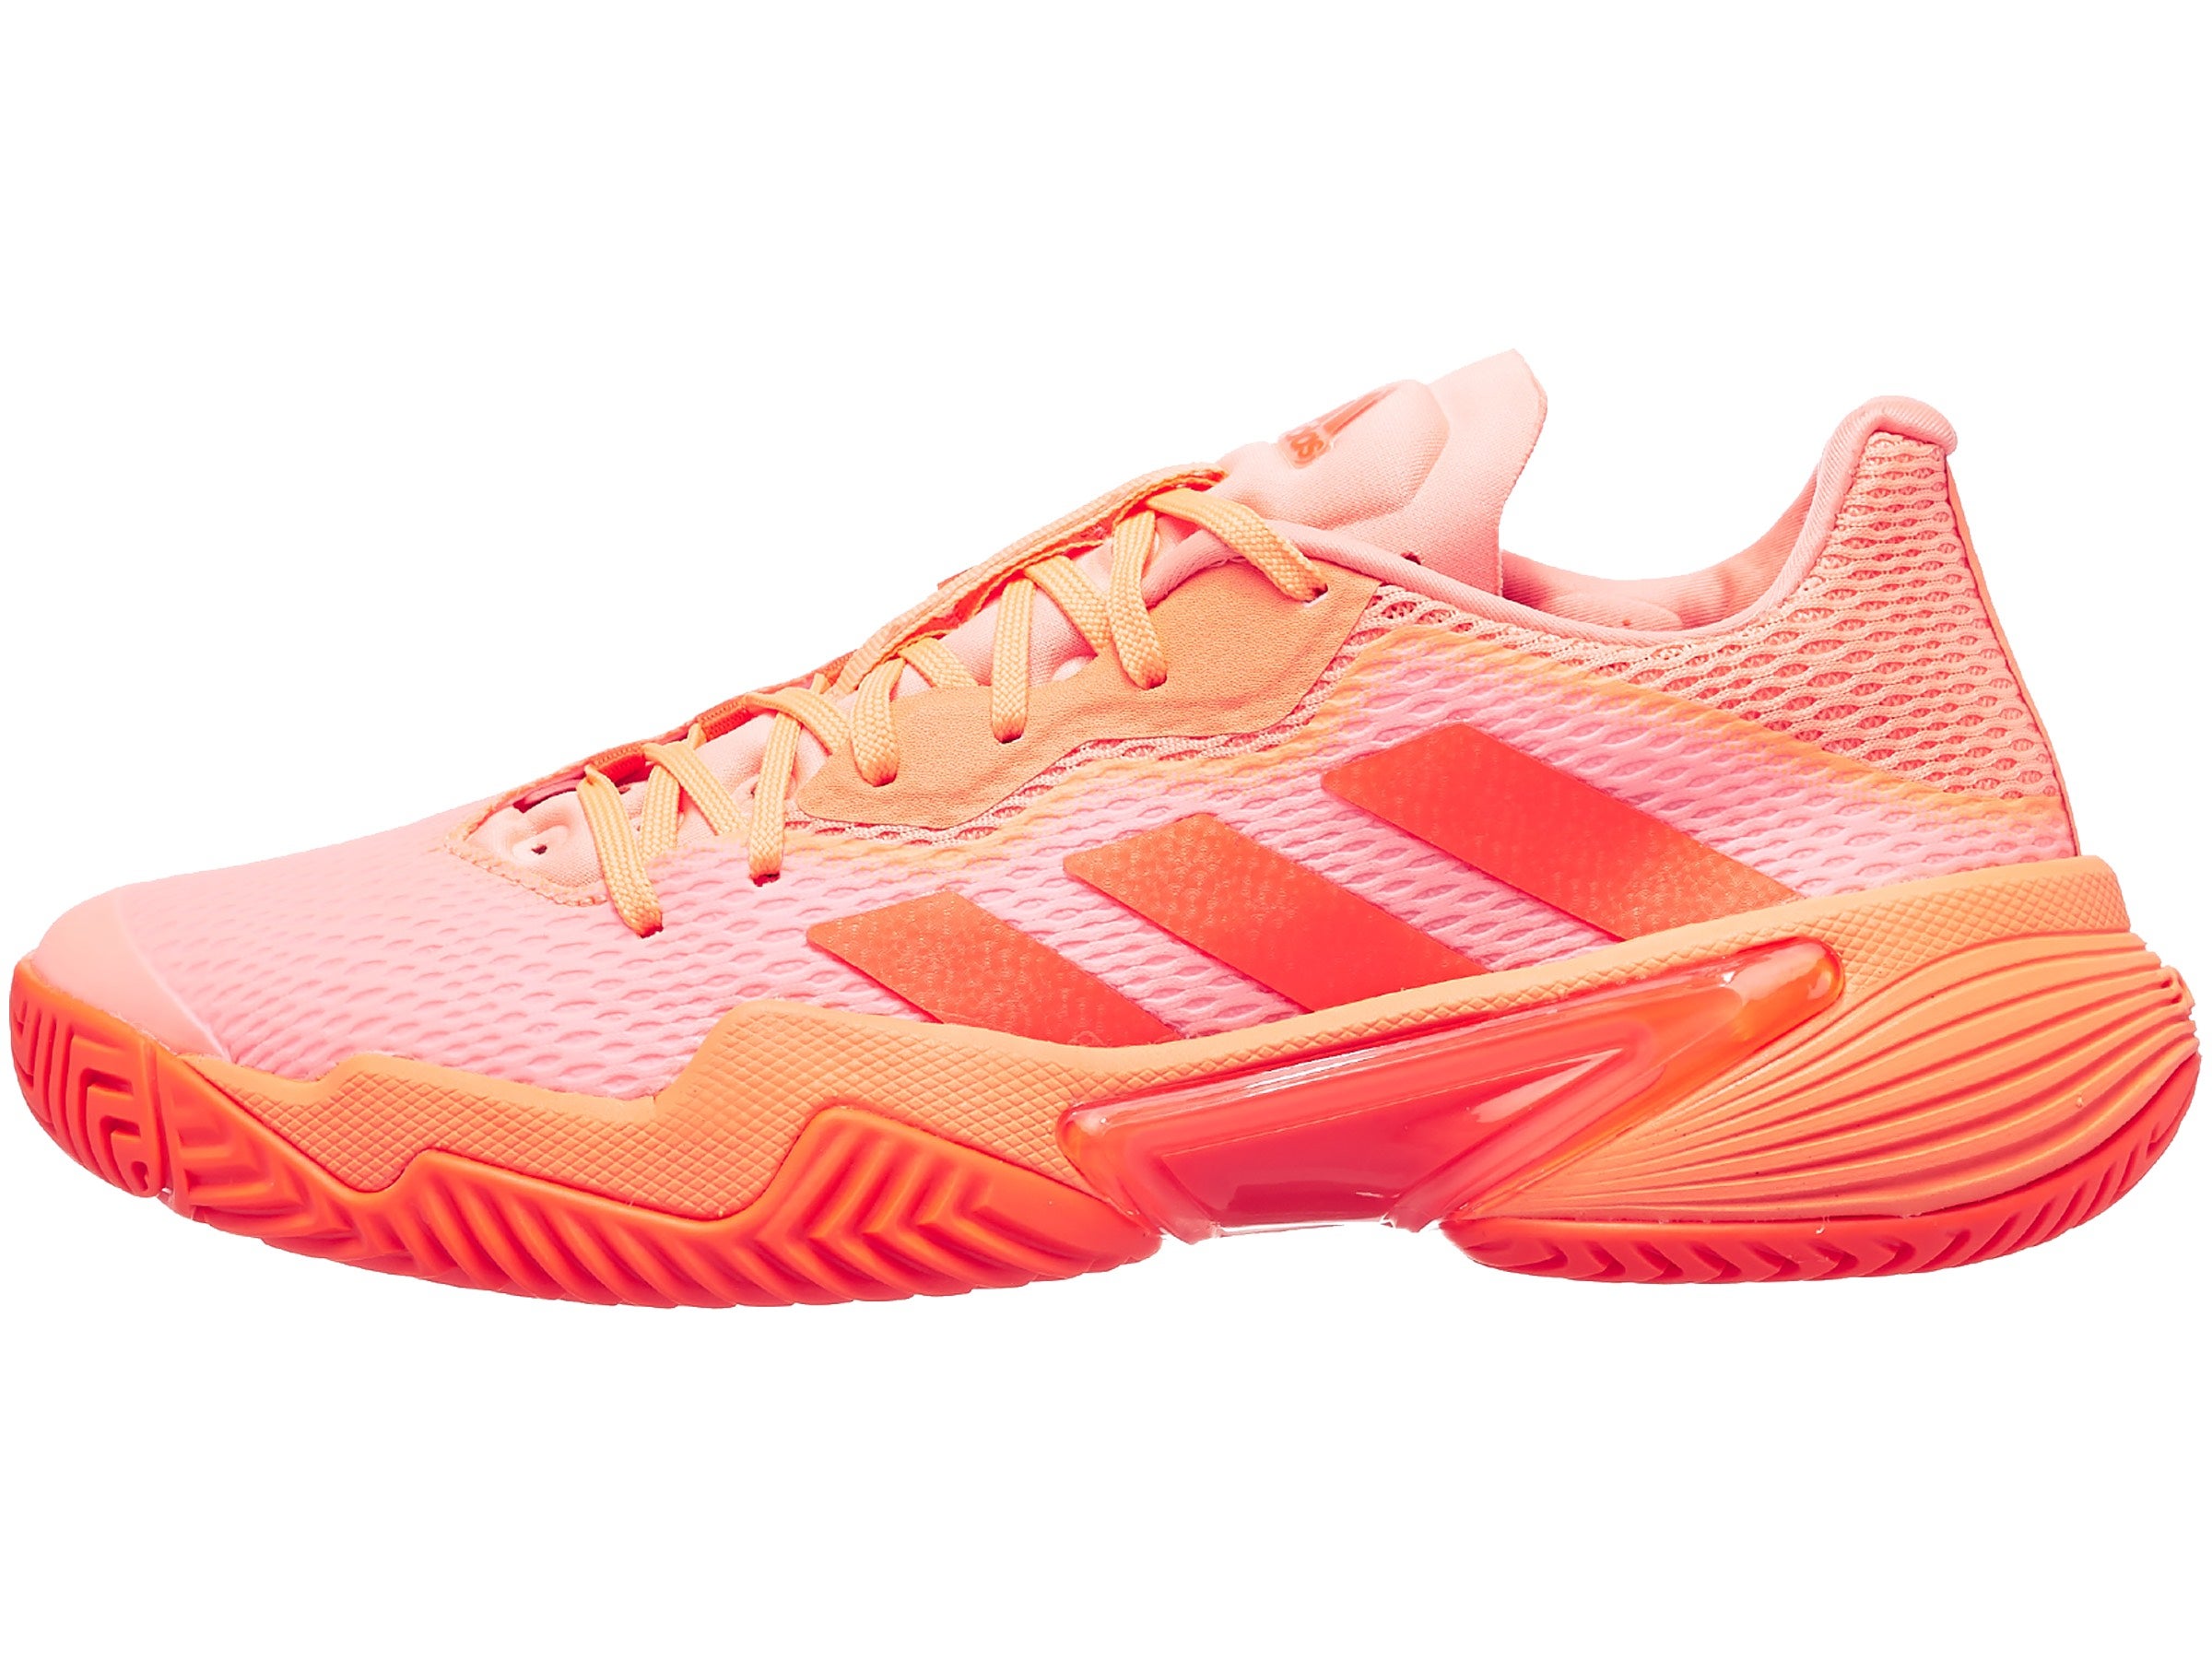 adidas Replaces Iconic Barricades with New Court Tennis Shoes - TENNIS  EXPRESS BLOG